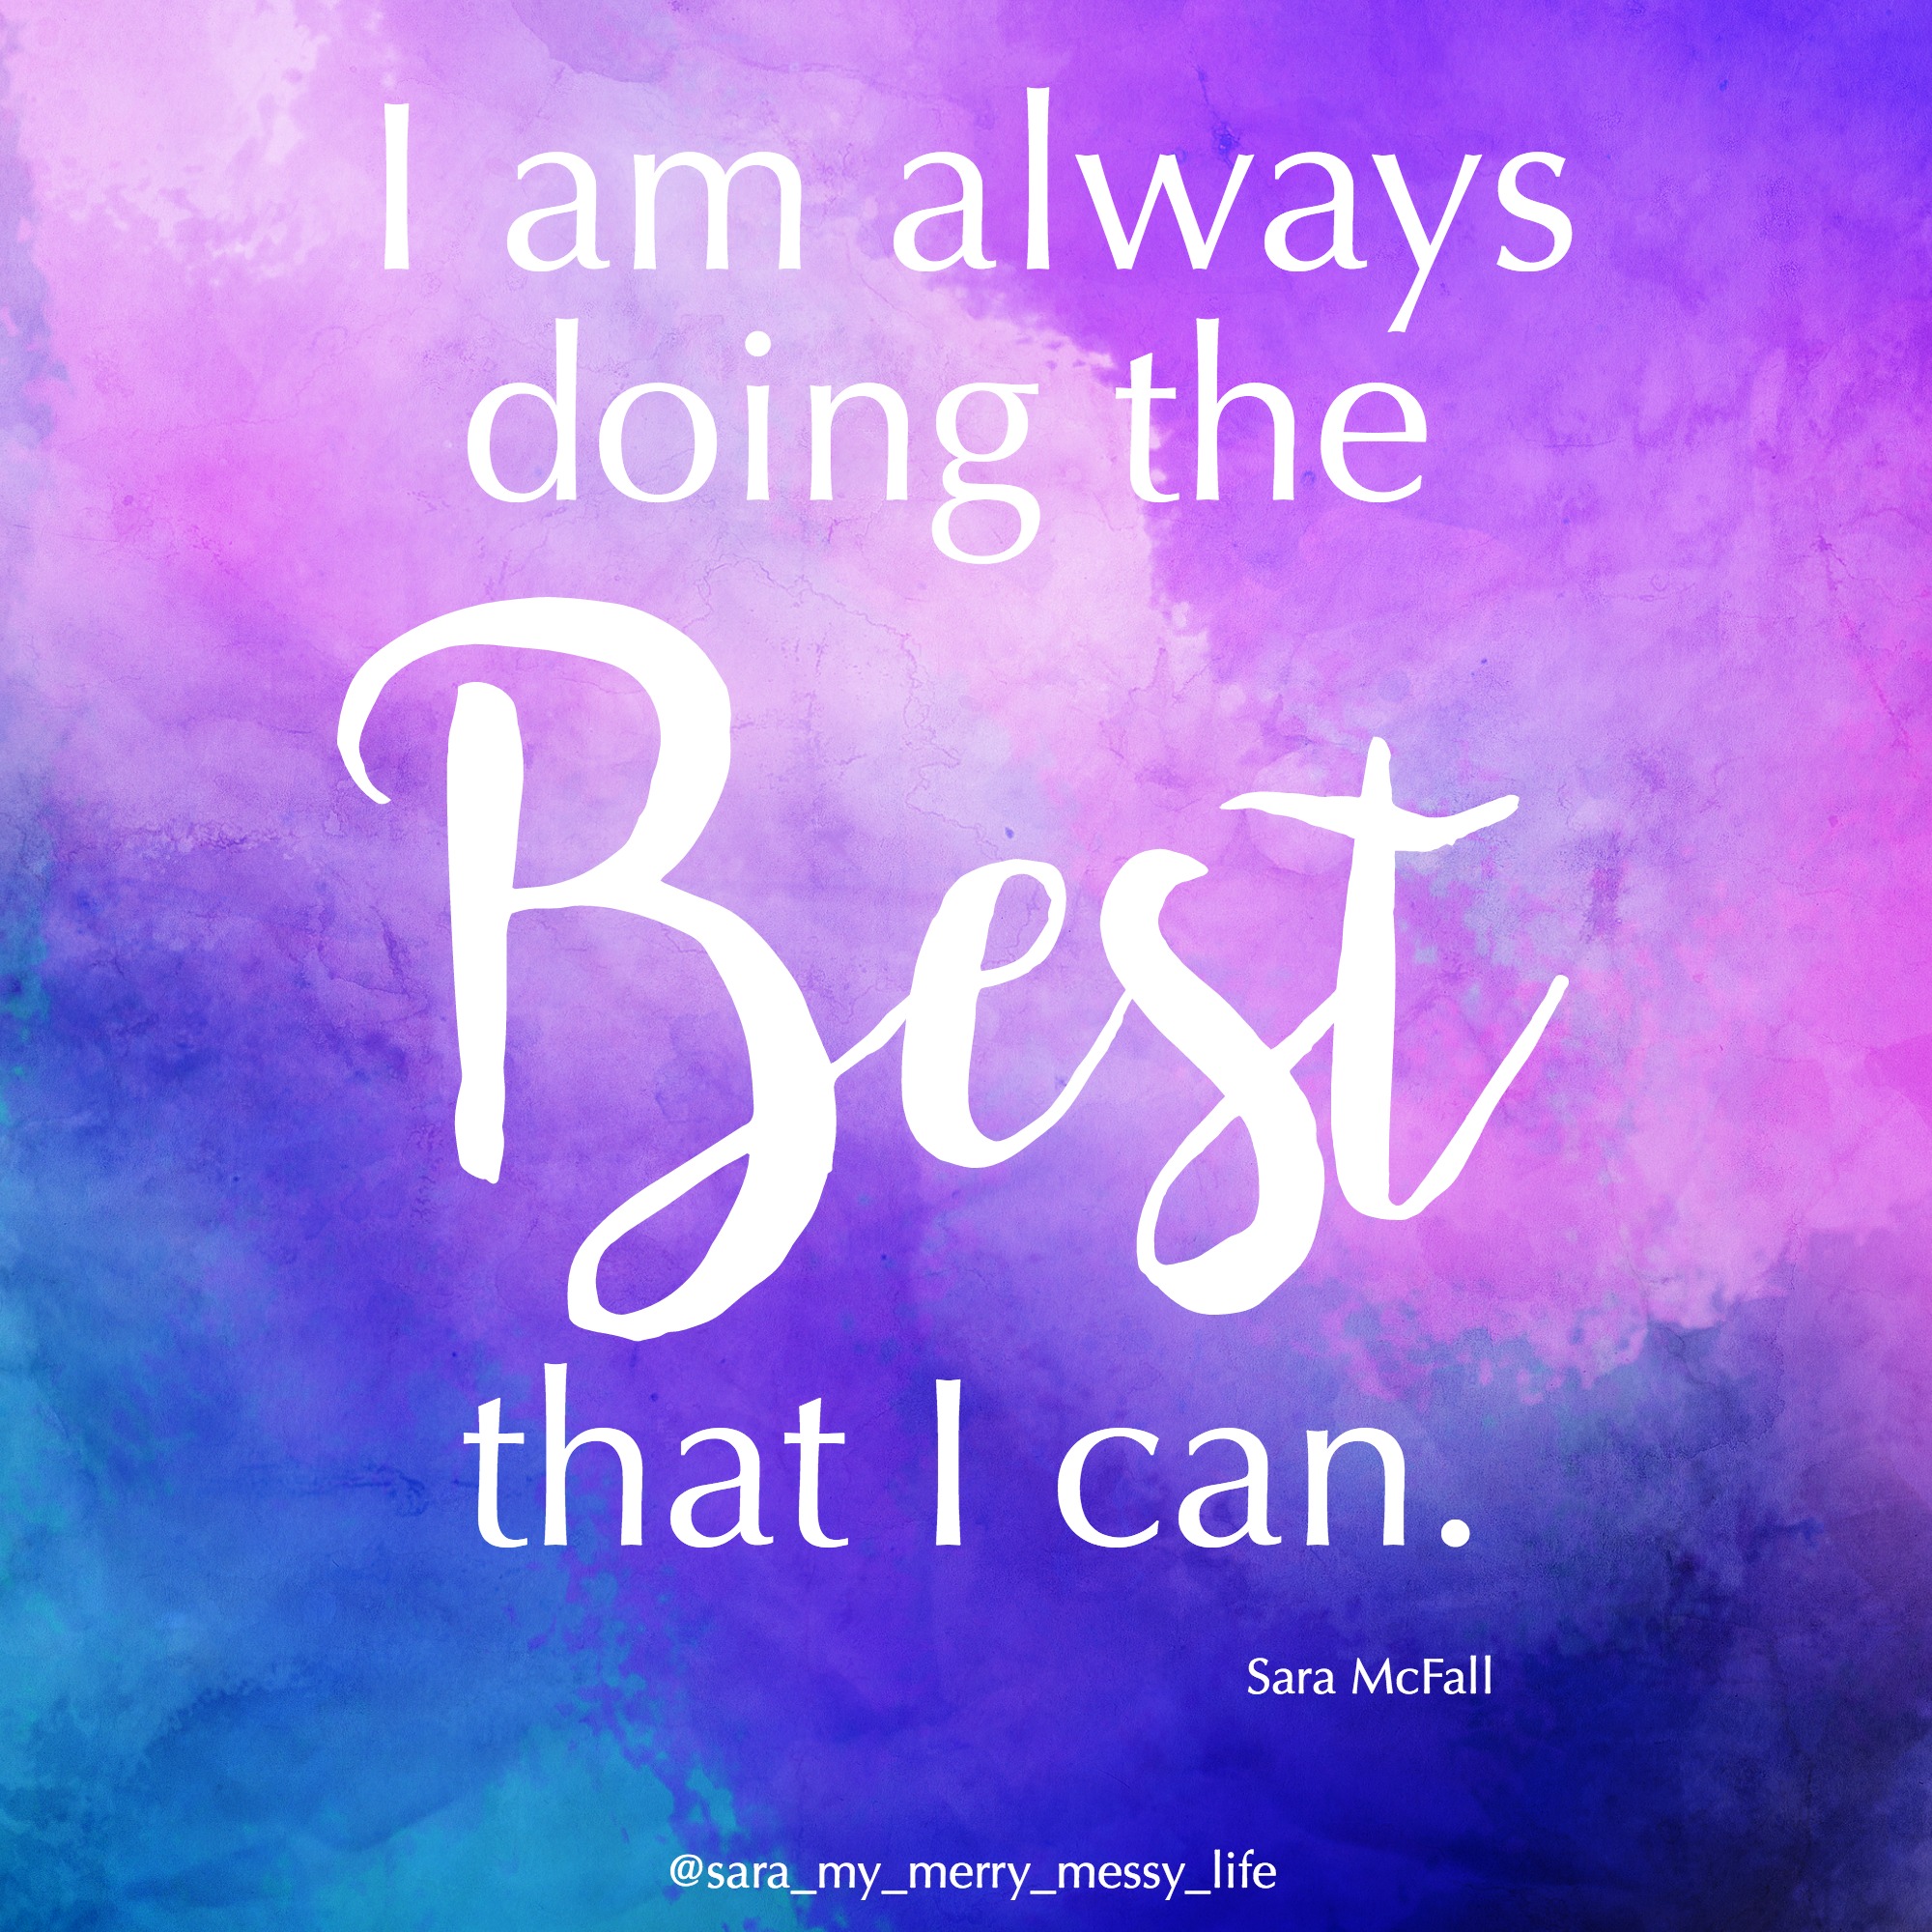 I am always doing the best that I can. - Sara McFall